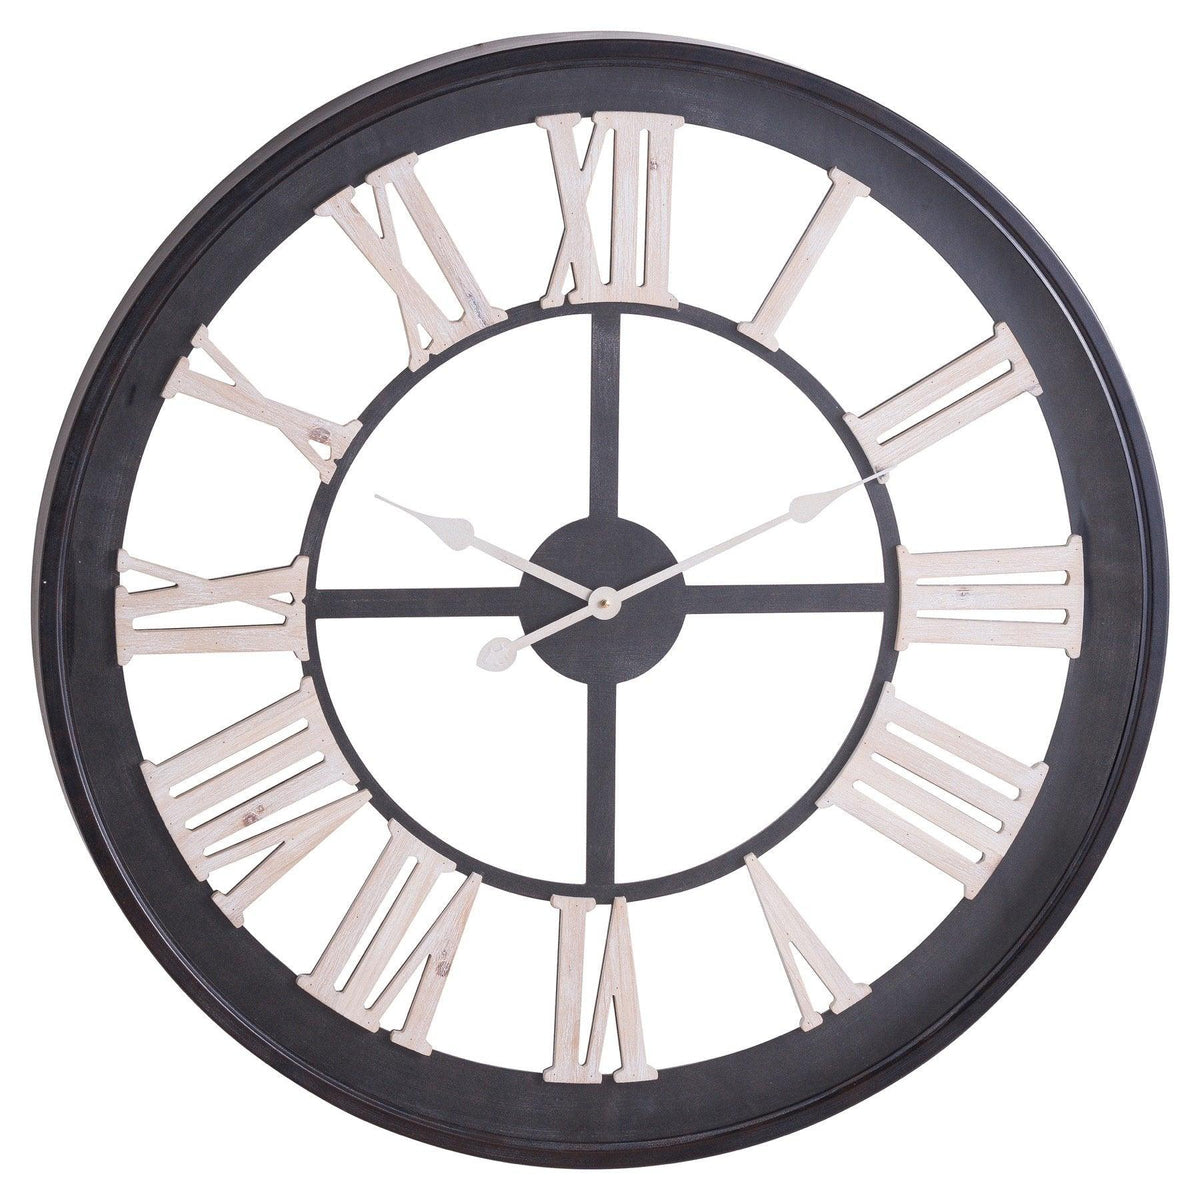 Black Framed Skeleton Clock With White Roman Numerals - Vookoo Lifestyle